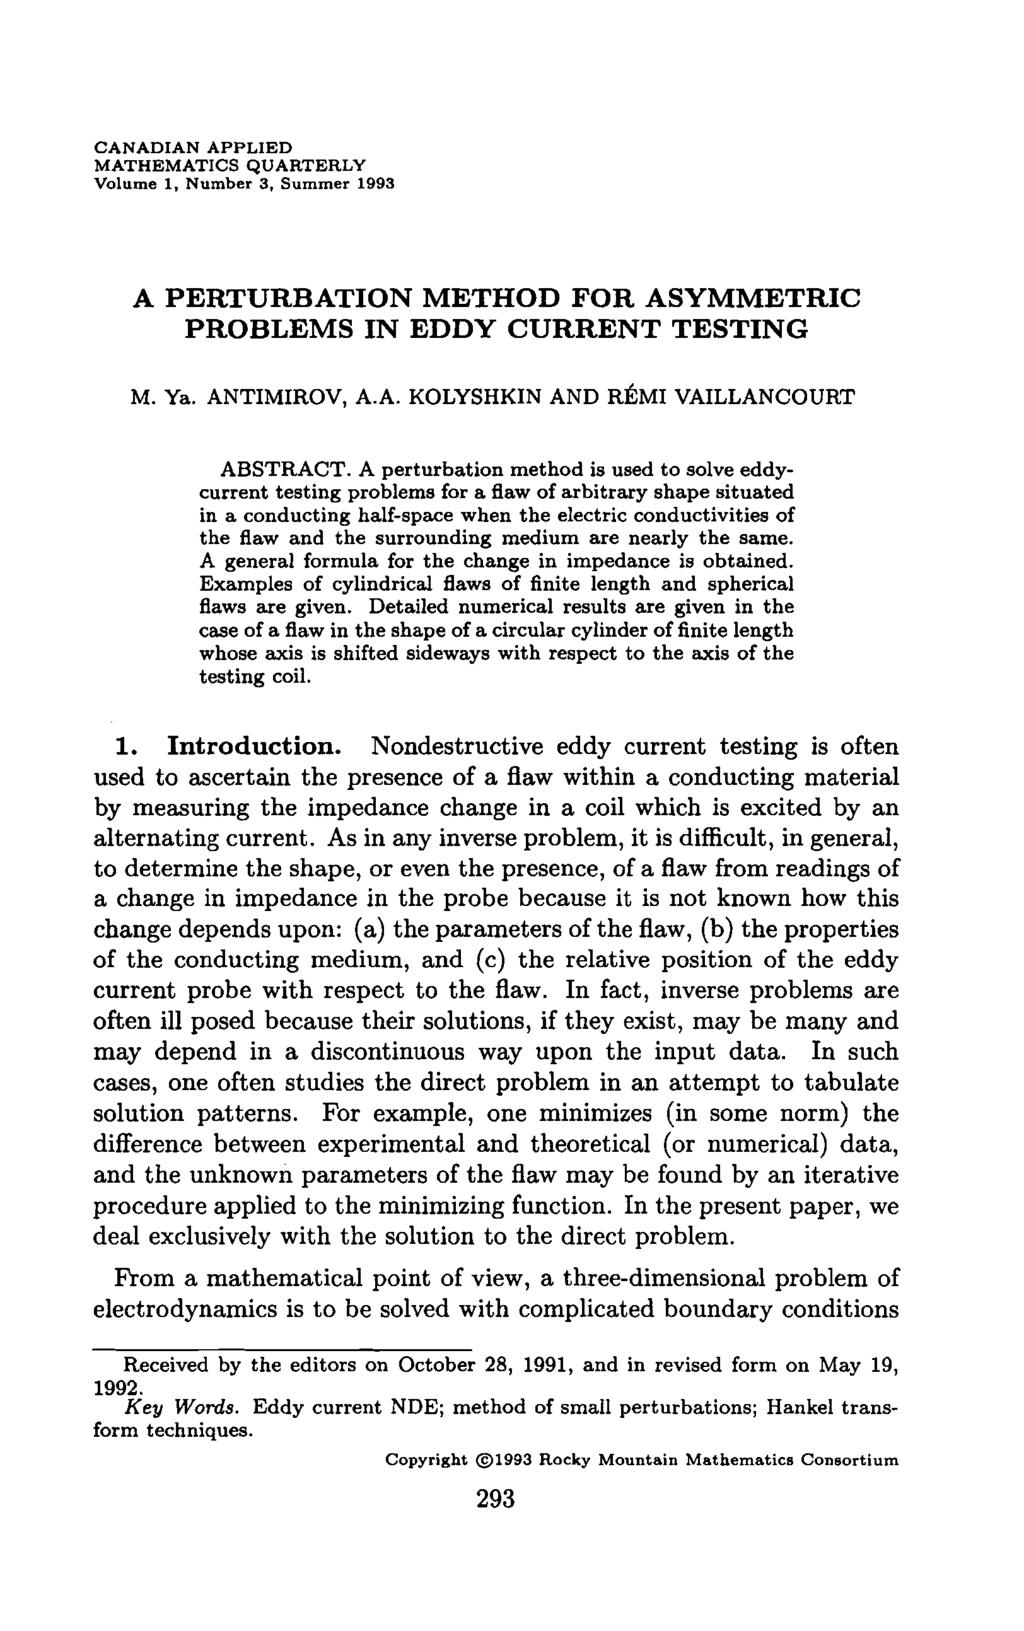 CANADIAN APPLIED MATHEMATICS QUARTERLY Volume 1. Number 3. Summer 1993 A PERTURBATION METHOD FOR ASYMMETRIC PROBLEMS IN EDDY CURRENT TESTING M. Ya. ANTIMIROV, A.A. KOLYSHKIN AND R ~MIVAILLANCOURT ABSTRACT.